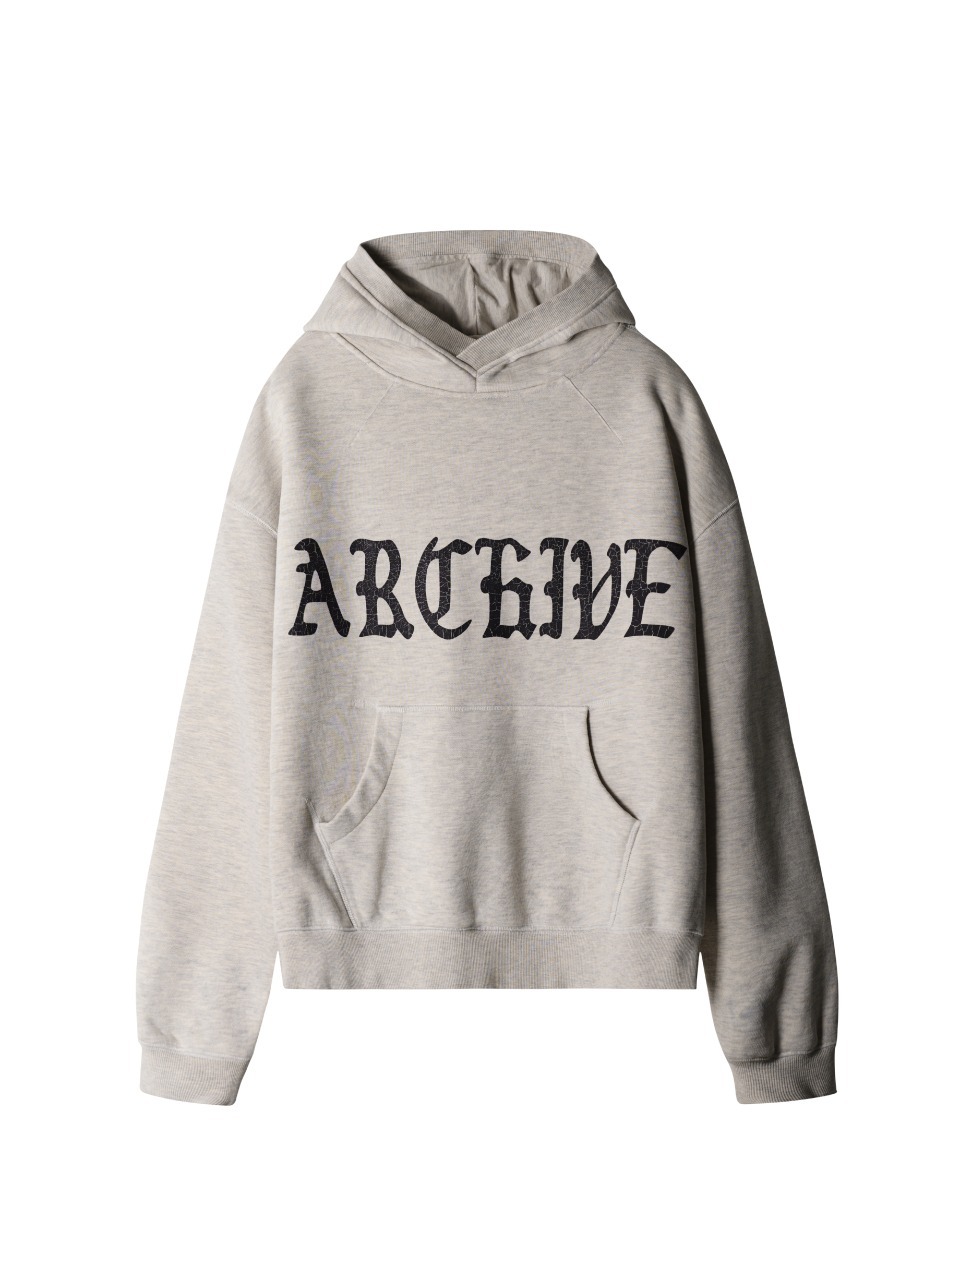 ETCE - ARCHIVE V RIP HOODIE (IVORY)